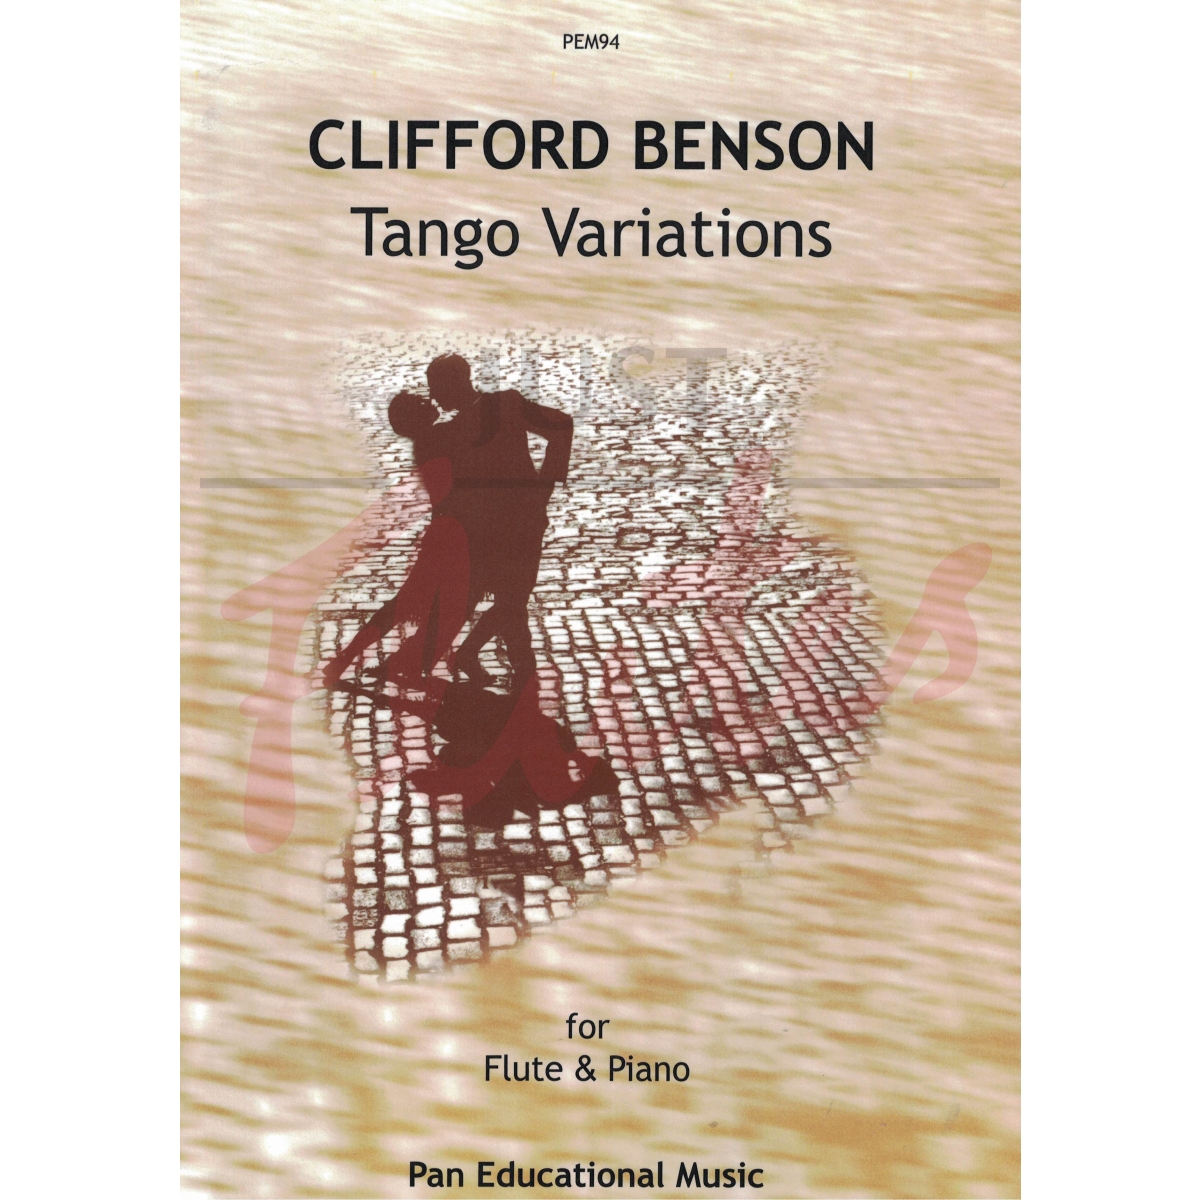 Tango Variations for Flute and Piano